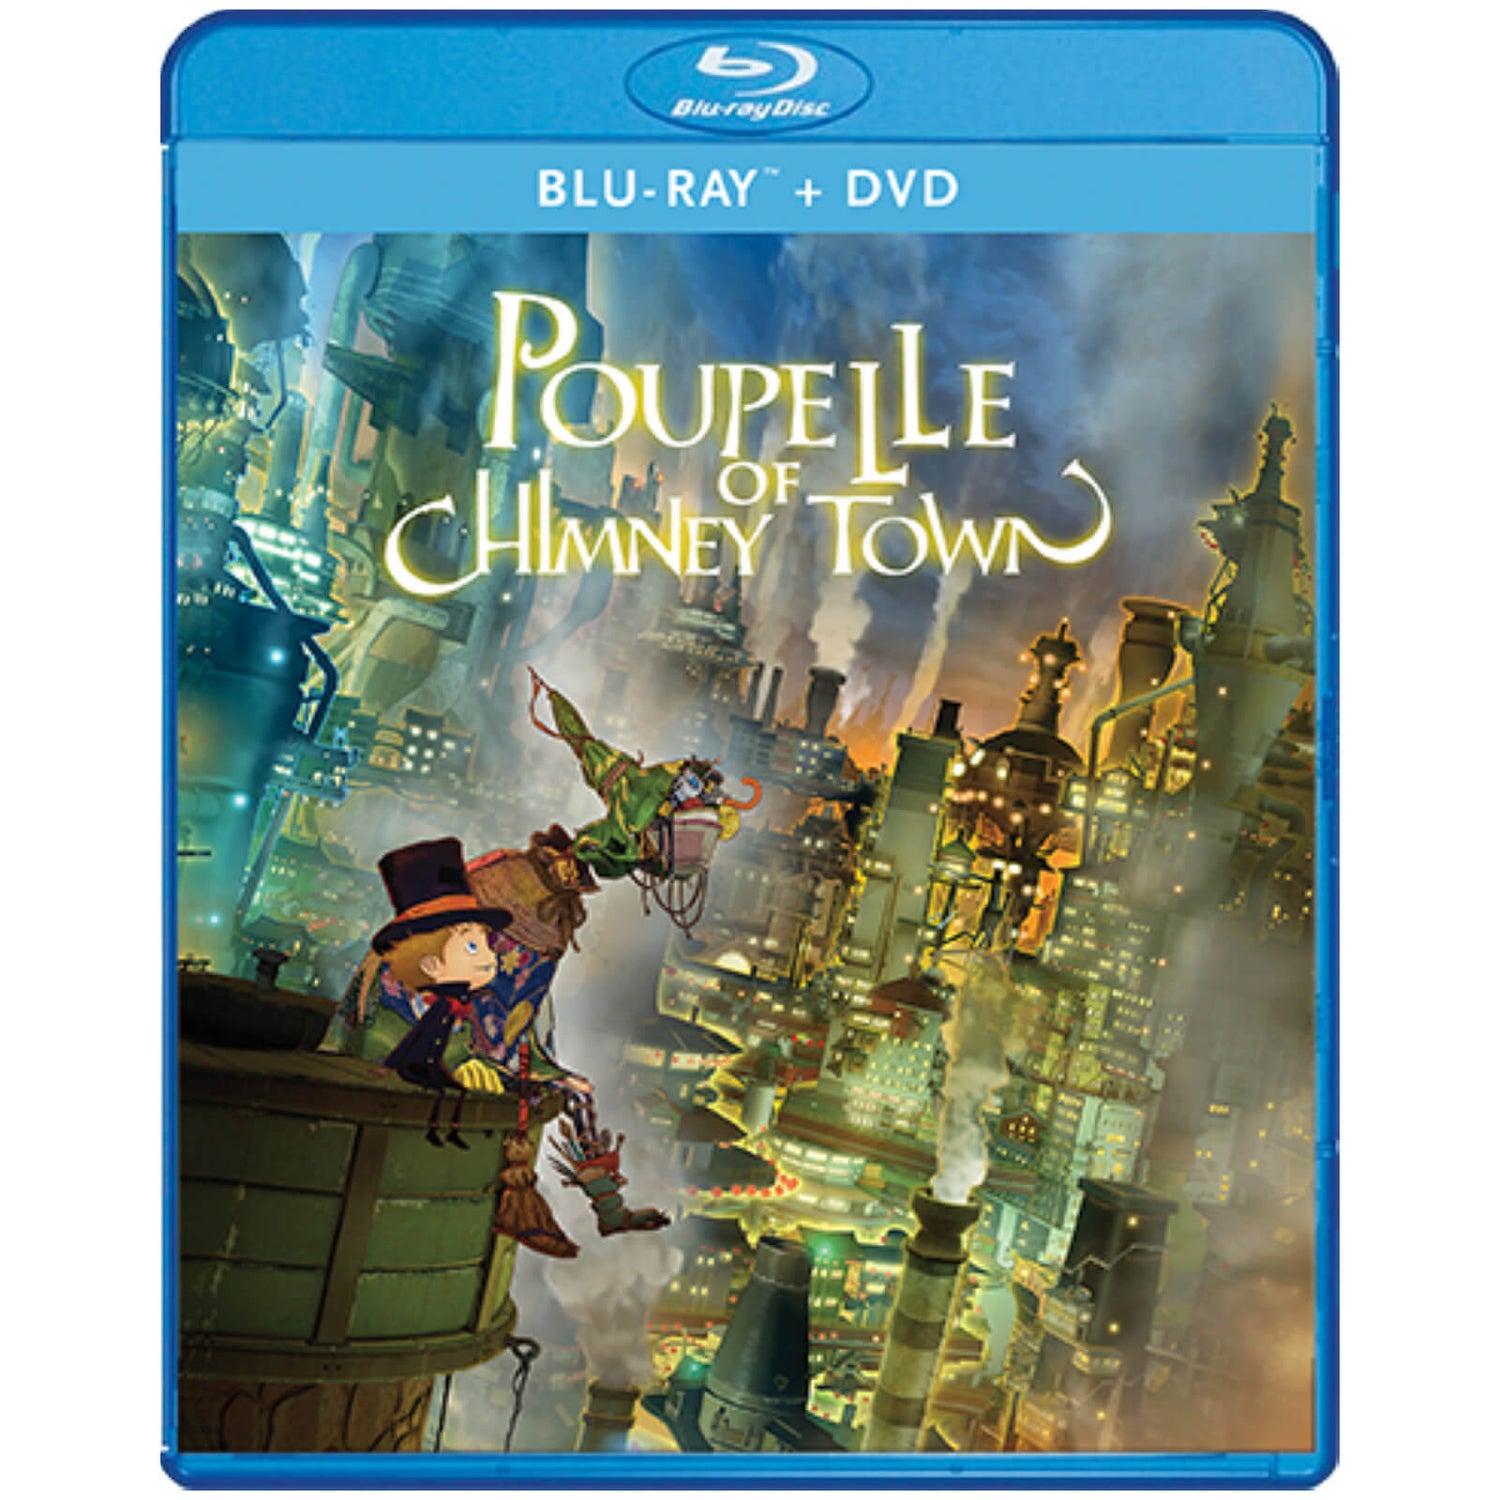 Poupelle Of Chimney Town (Includes DVD)